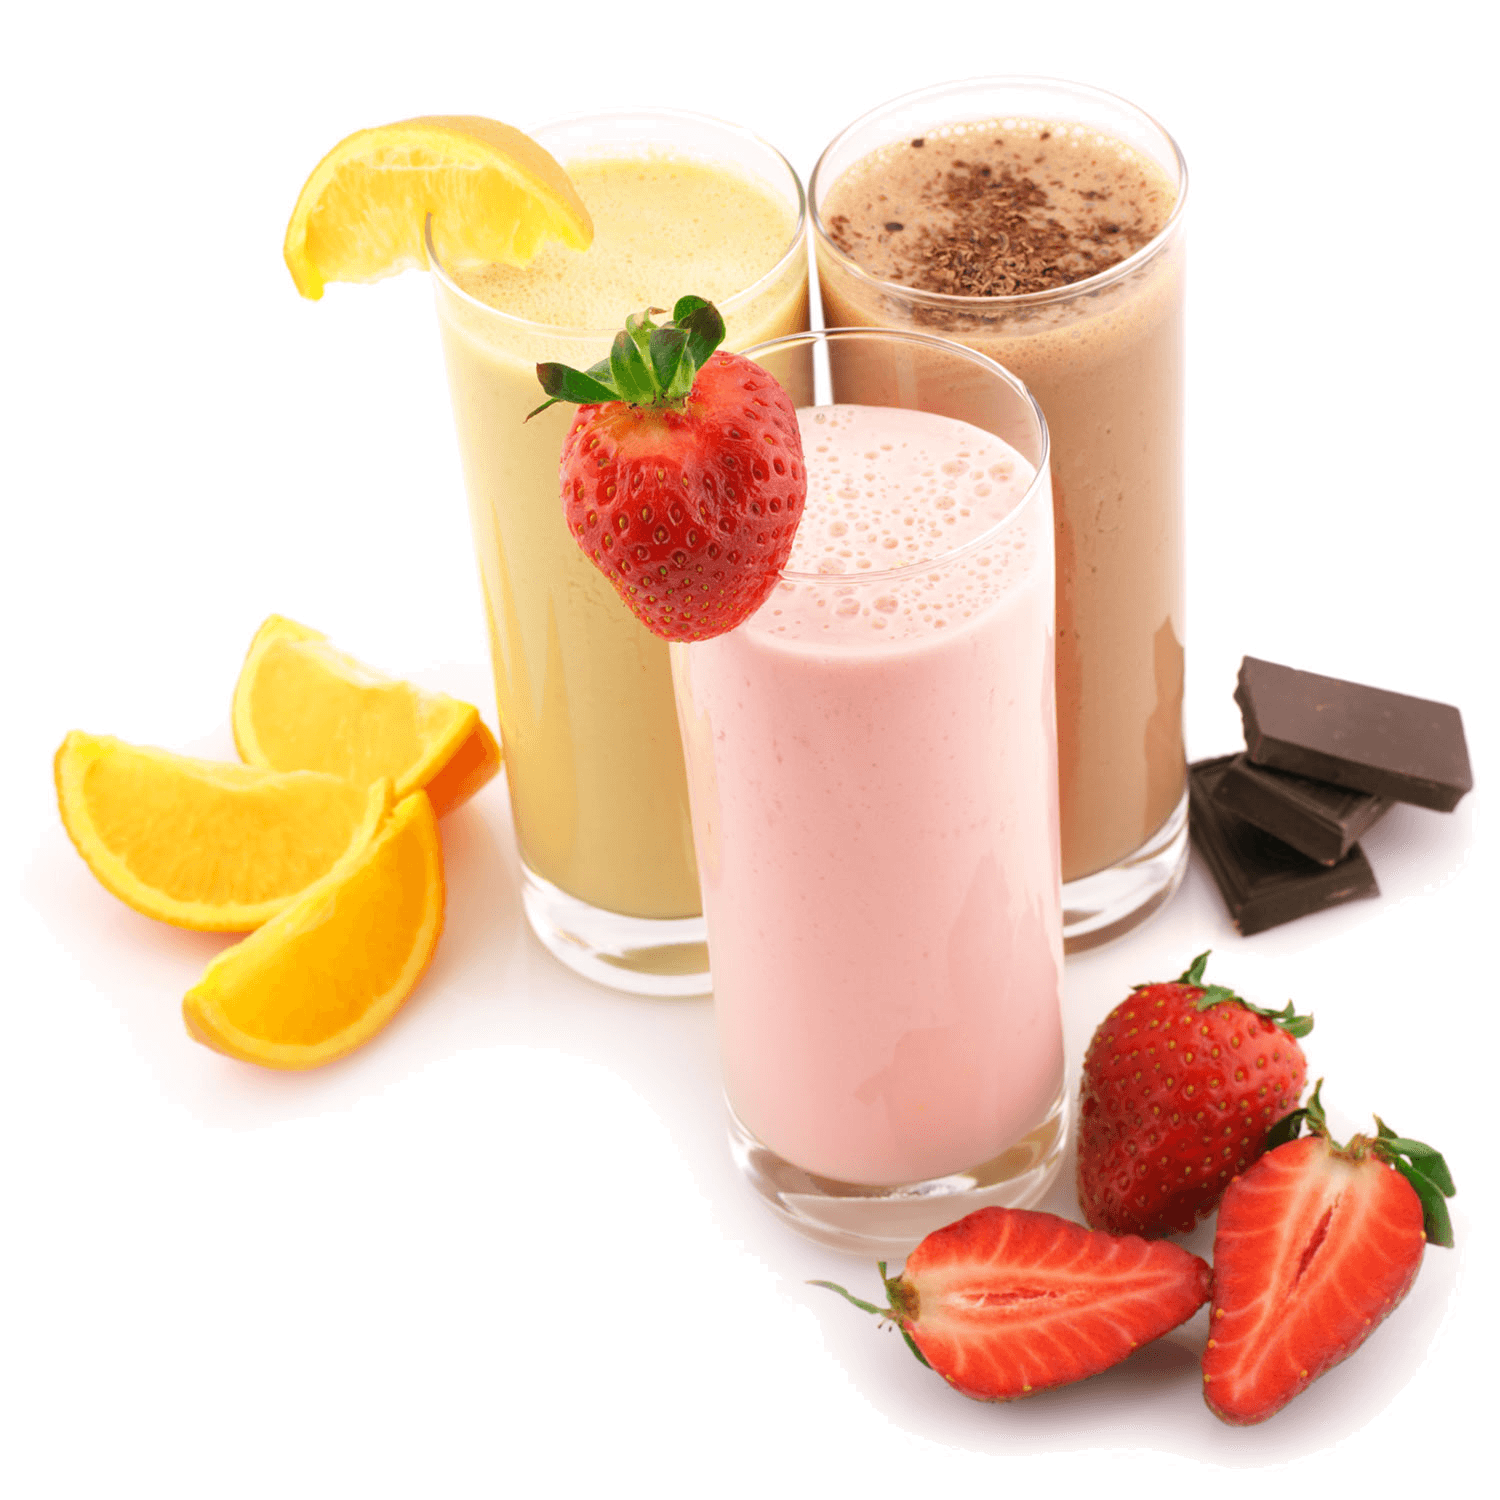 Weight Loss, High Protein Shakes